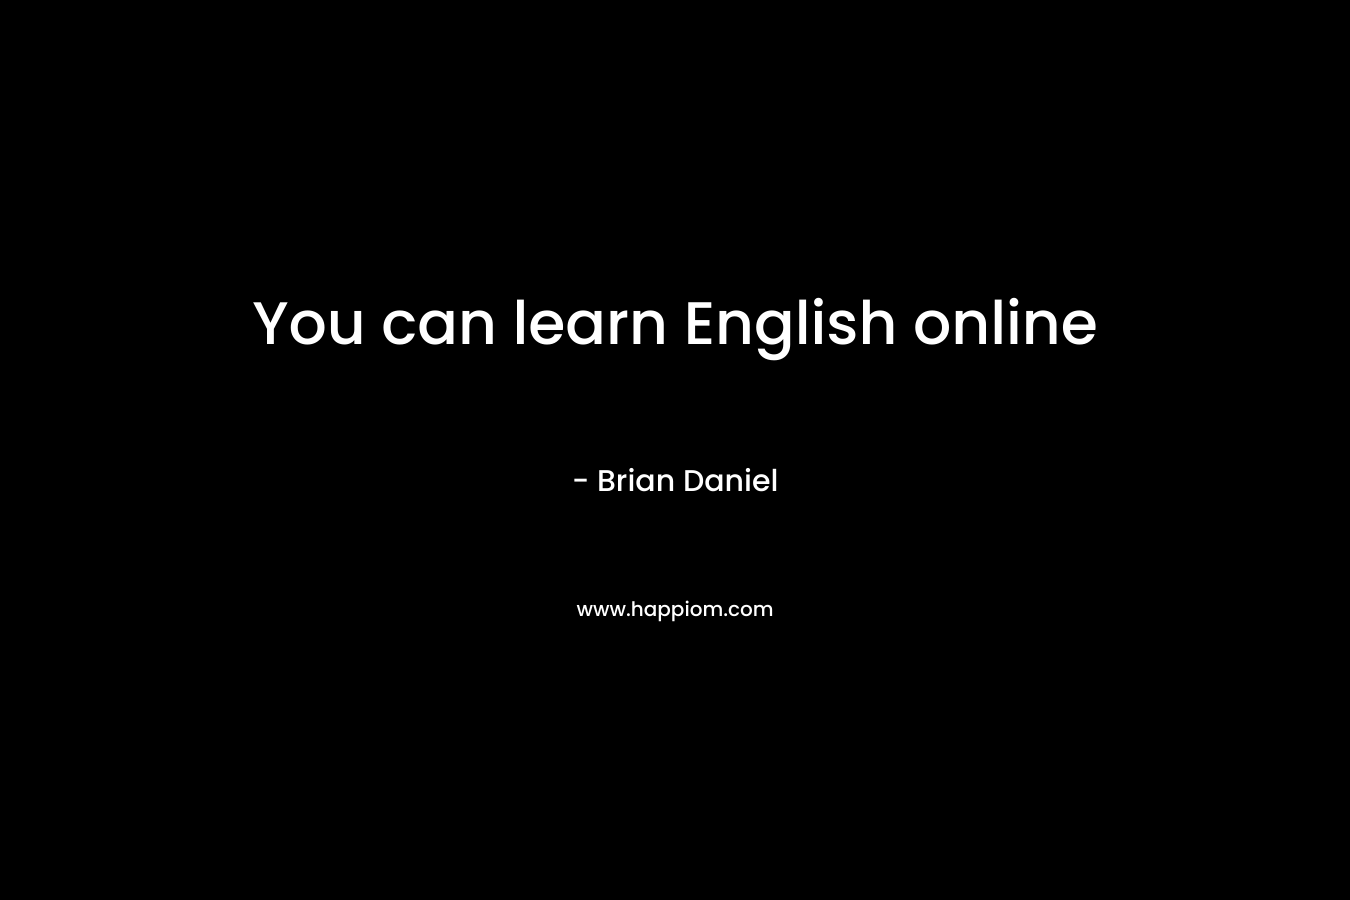 You can learn English online